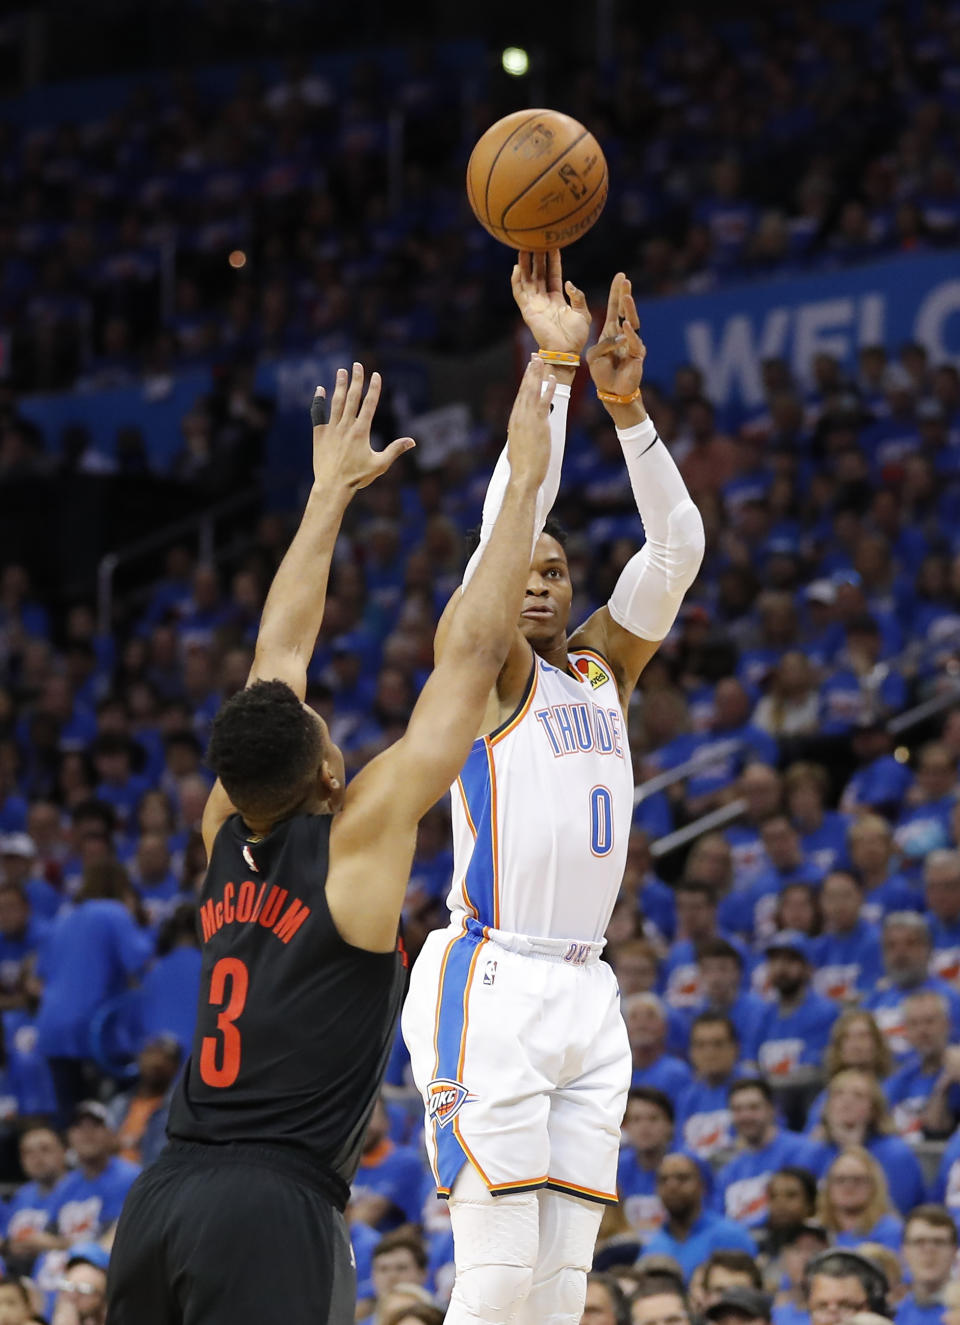 Oklahoma City Thunder guard Russell Westbrook (0) shoots a three point basket as Portland Trail Blazers guard CJ McCollum (3) defends in the first half of Game 4 of an NBA basketball first-round playoff series Sunday, April 21, 2019, in Oklahoma City. (AP Photo/Alonzo Adams)